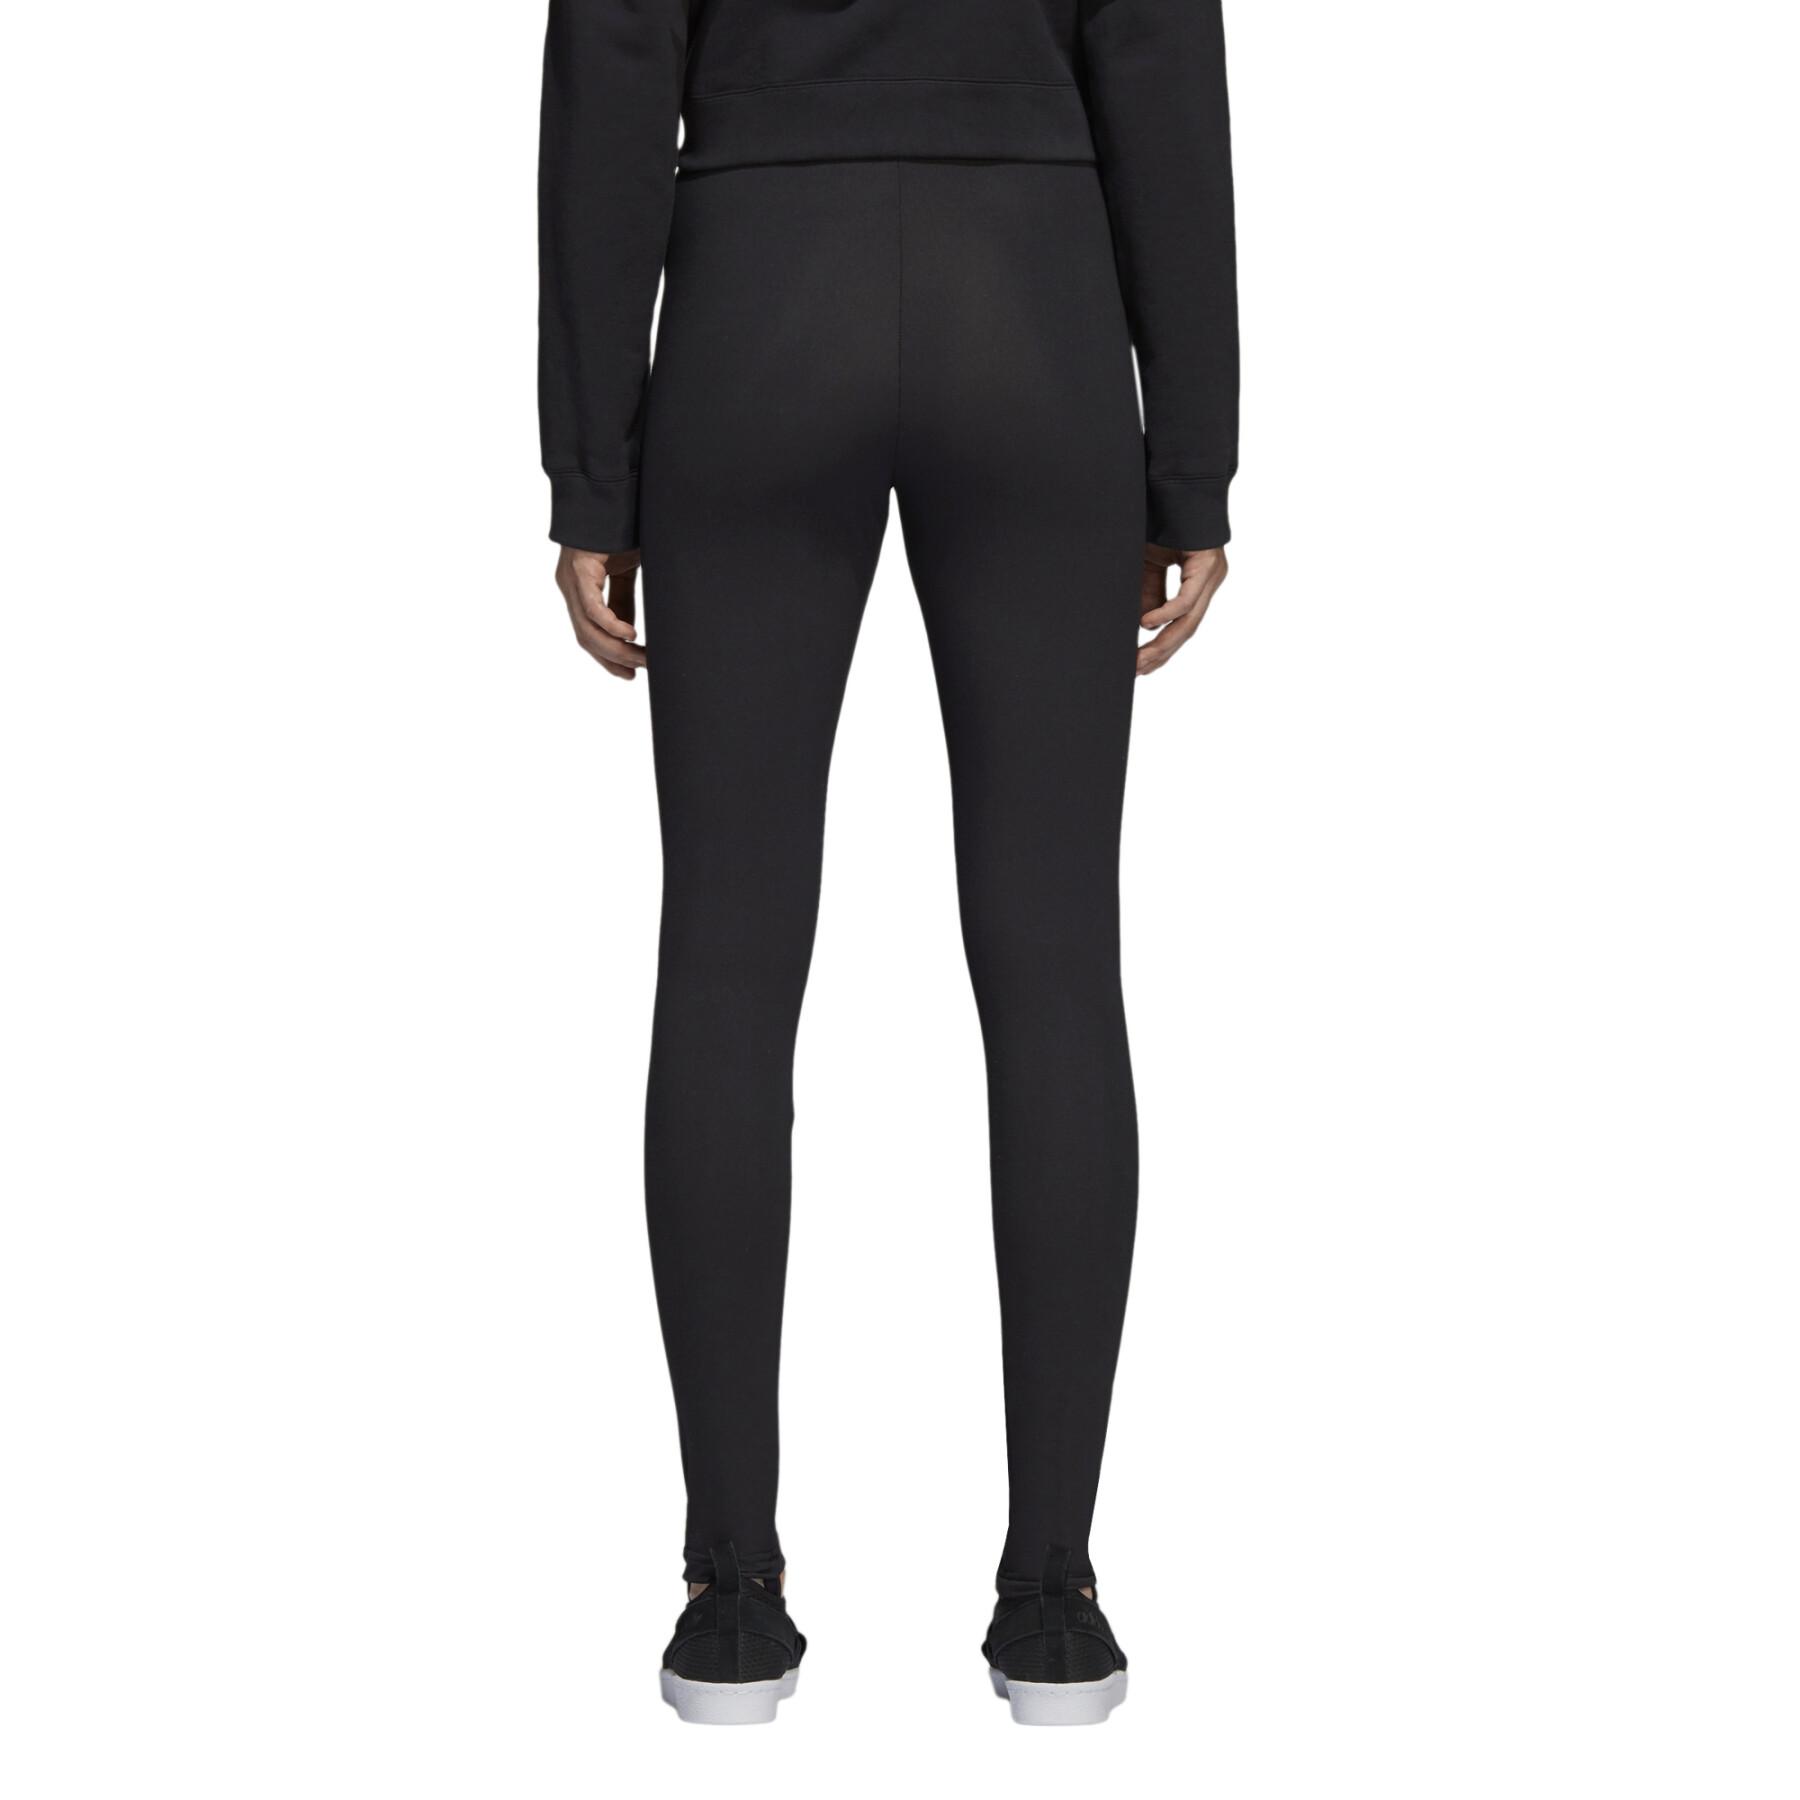 Legging femme adidas Styling Complements Stirrup